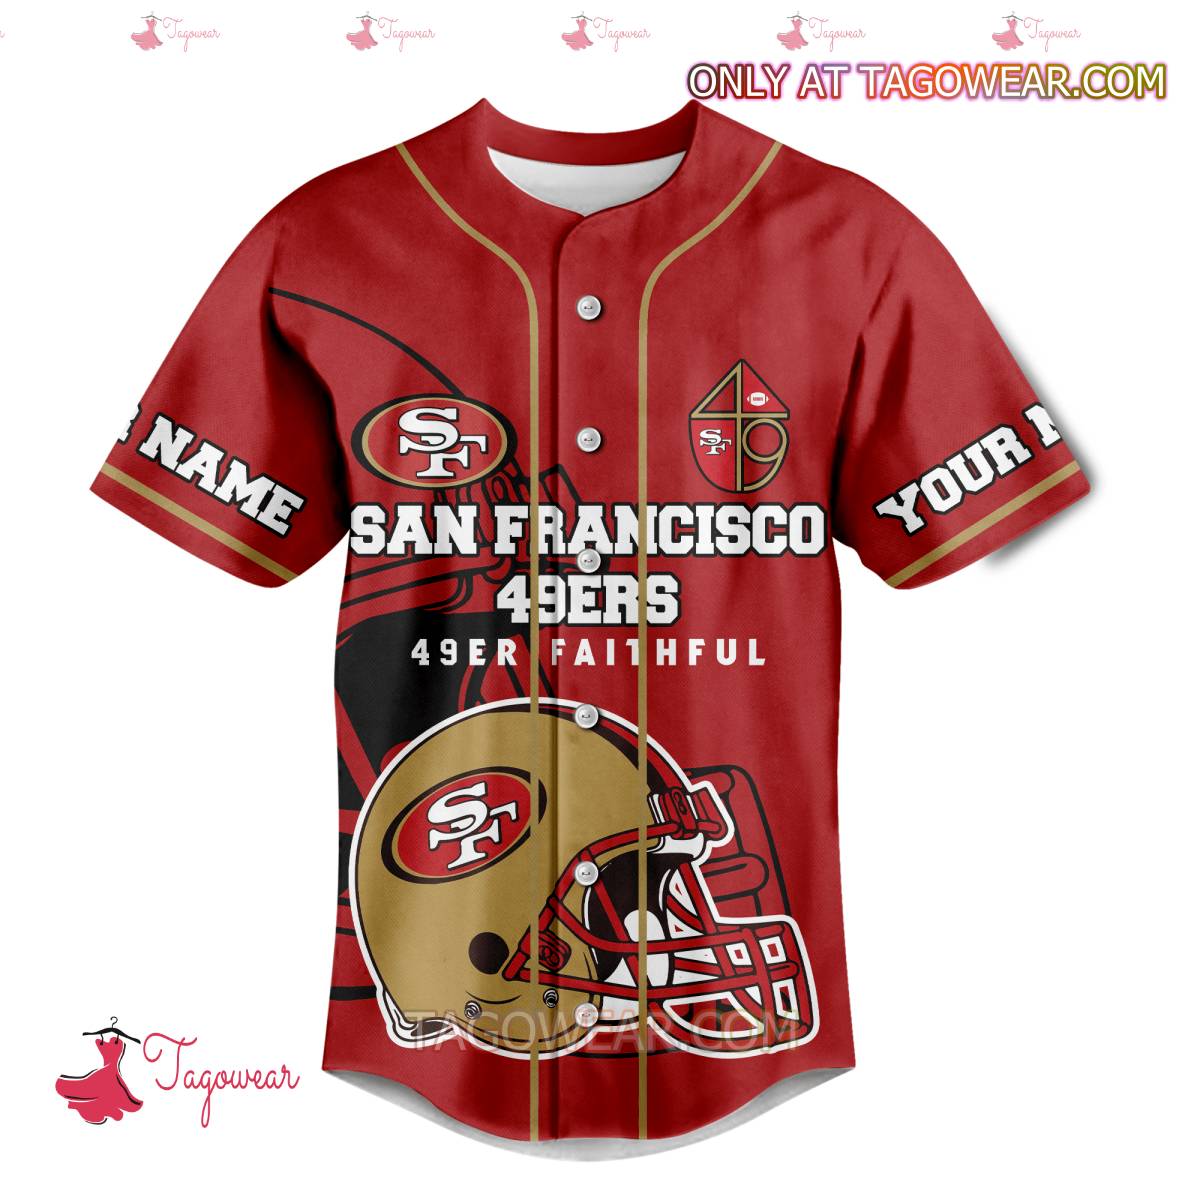 San Francisco 49ers Officially The World's Coolest Personalized Baseball Jersey a